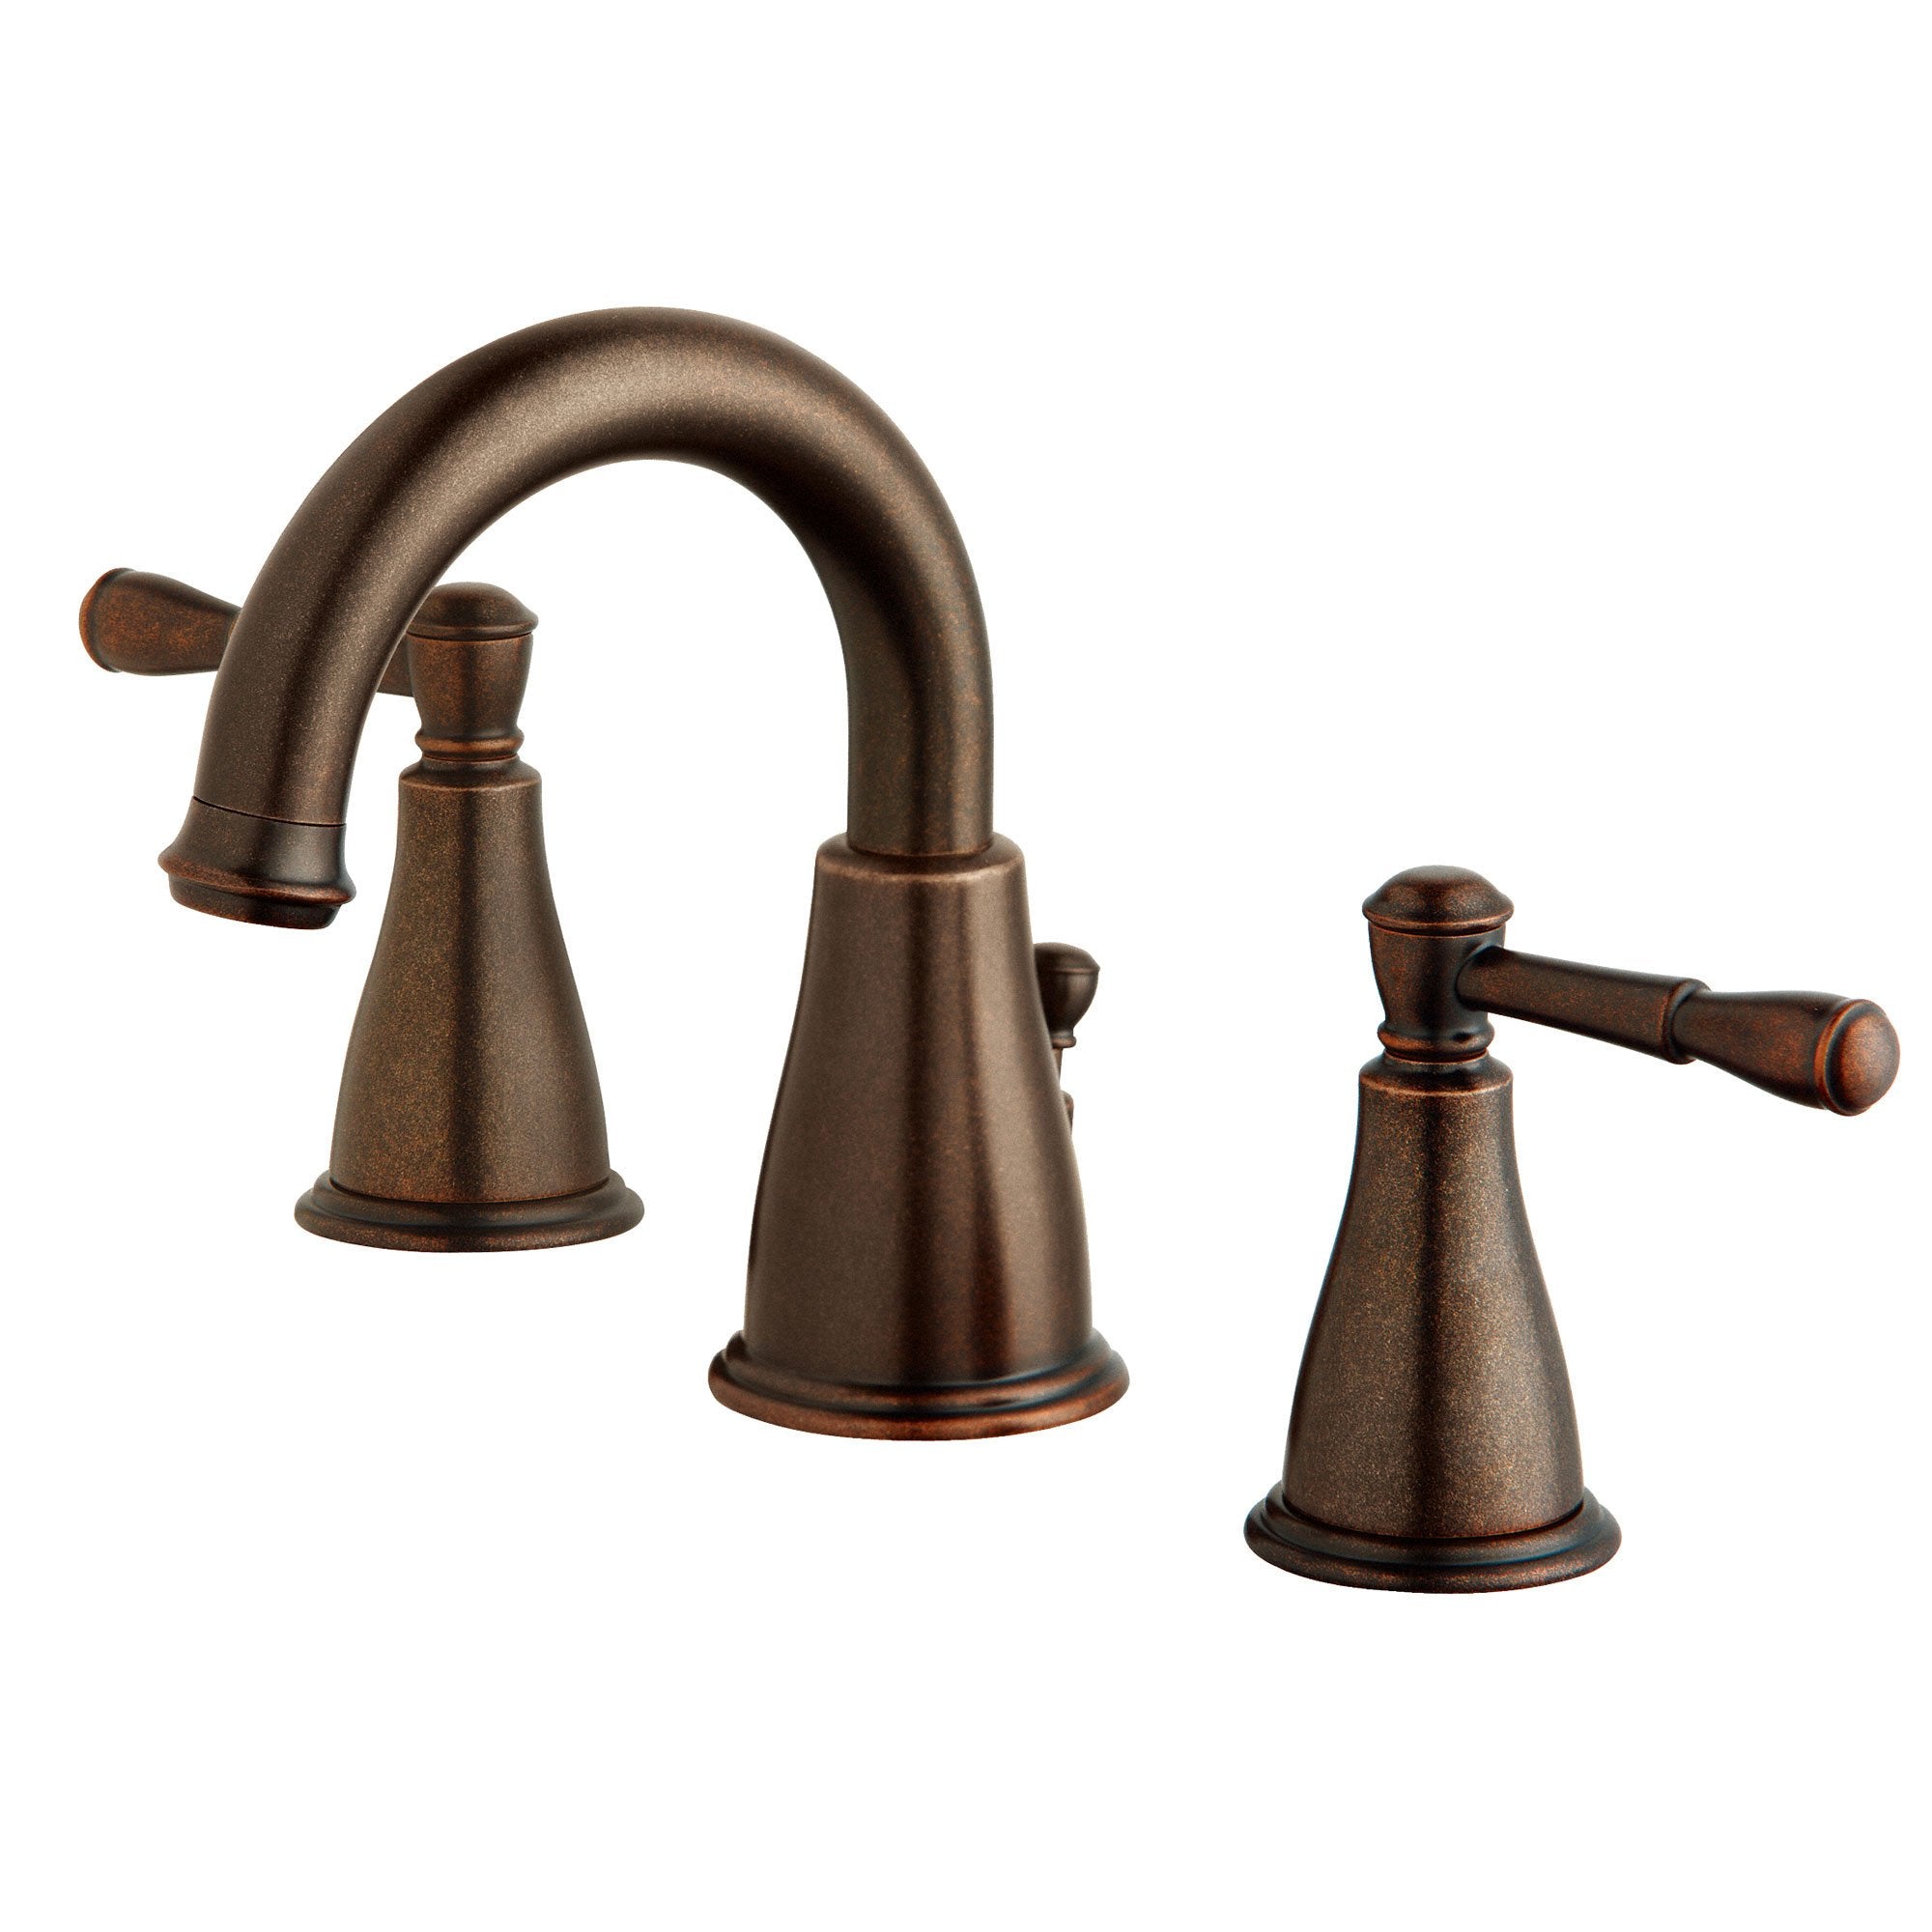 Danze Eastham Tumbled Bronze Scroll Lever Widespread Bathroom Sink Faucet